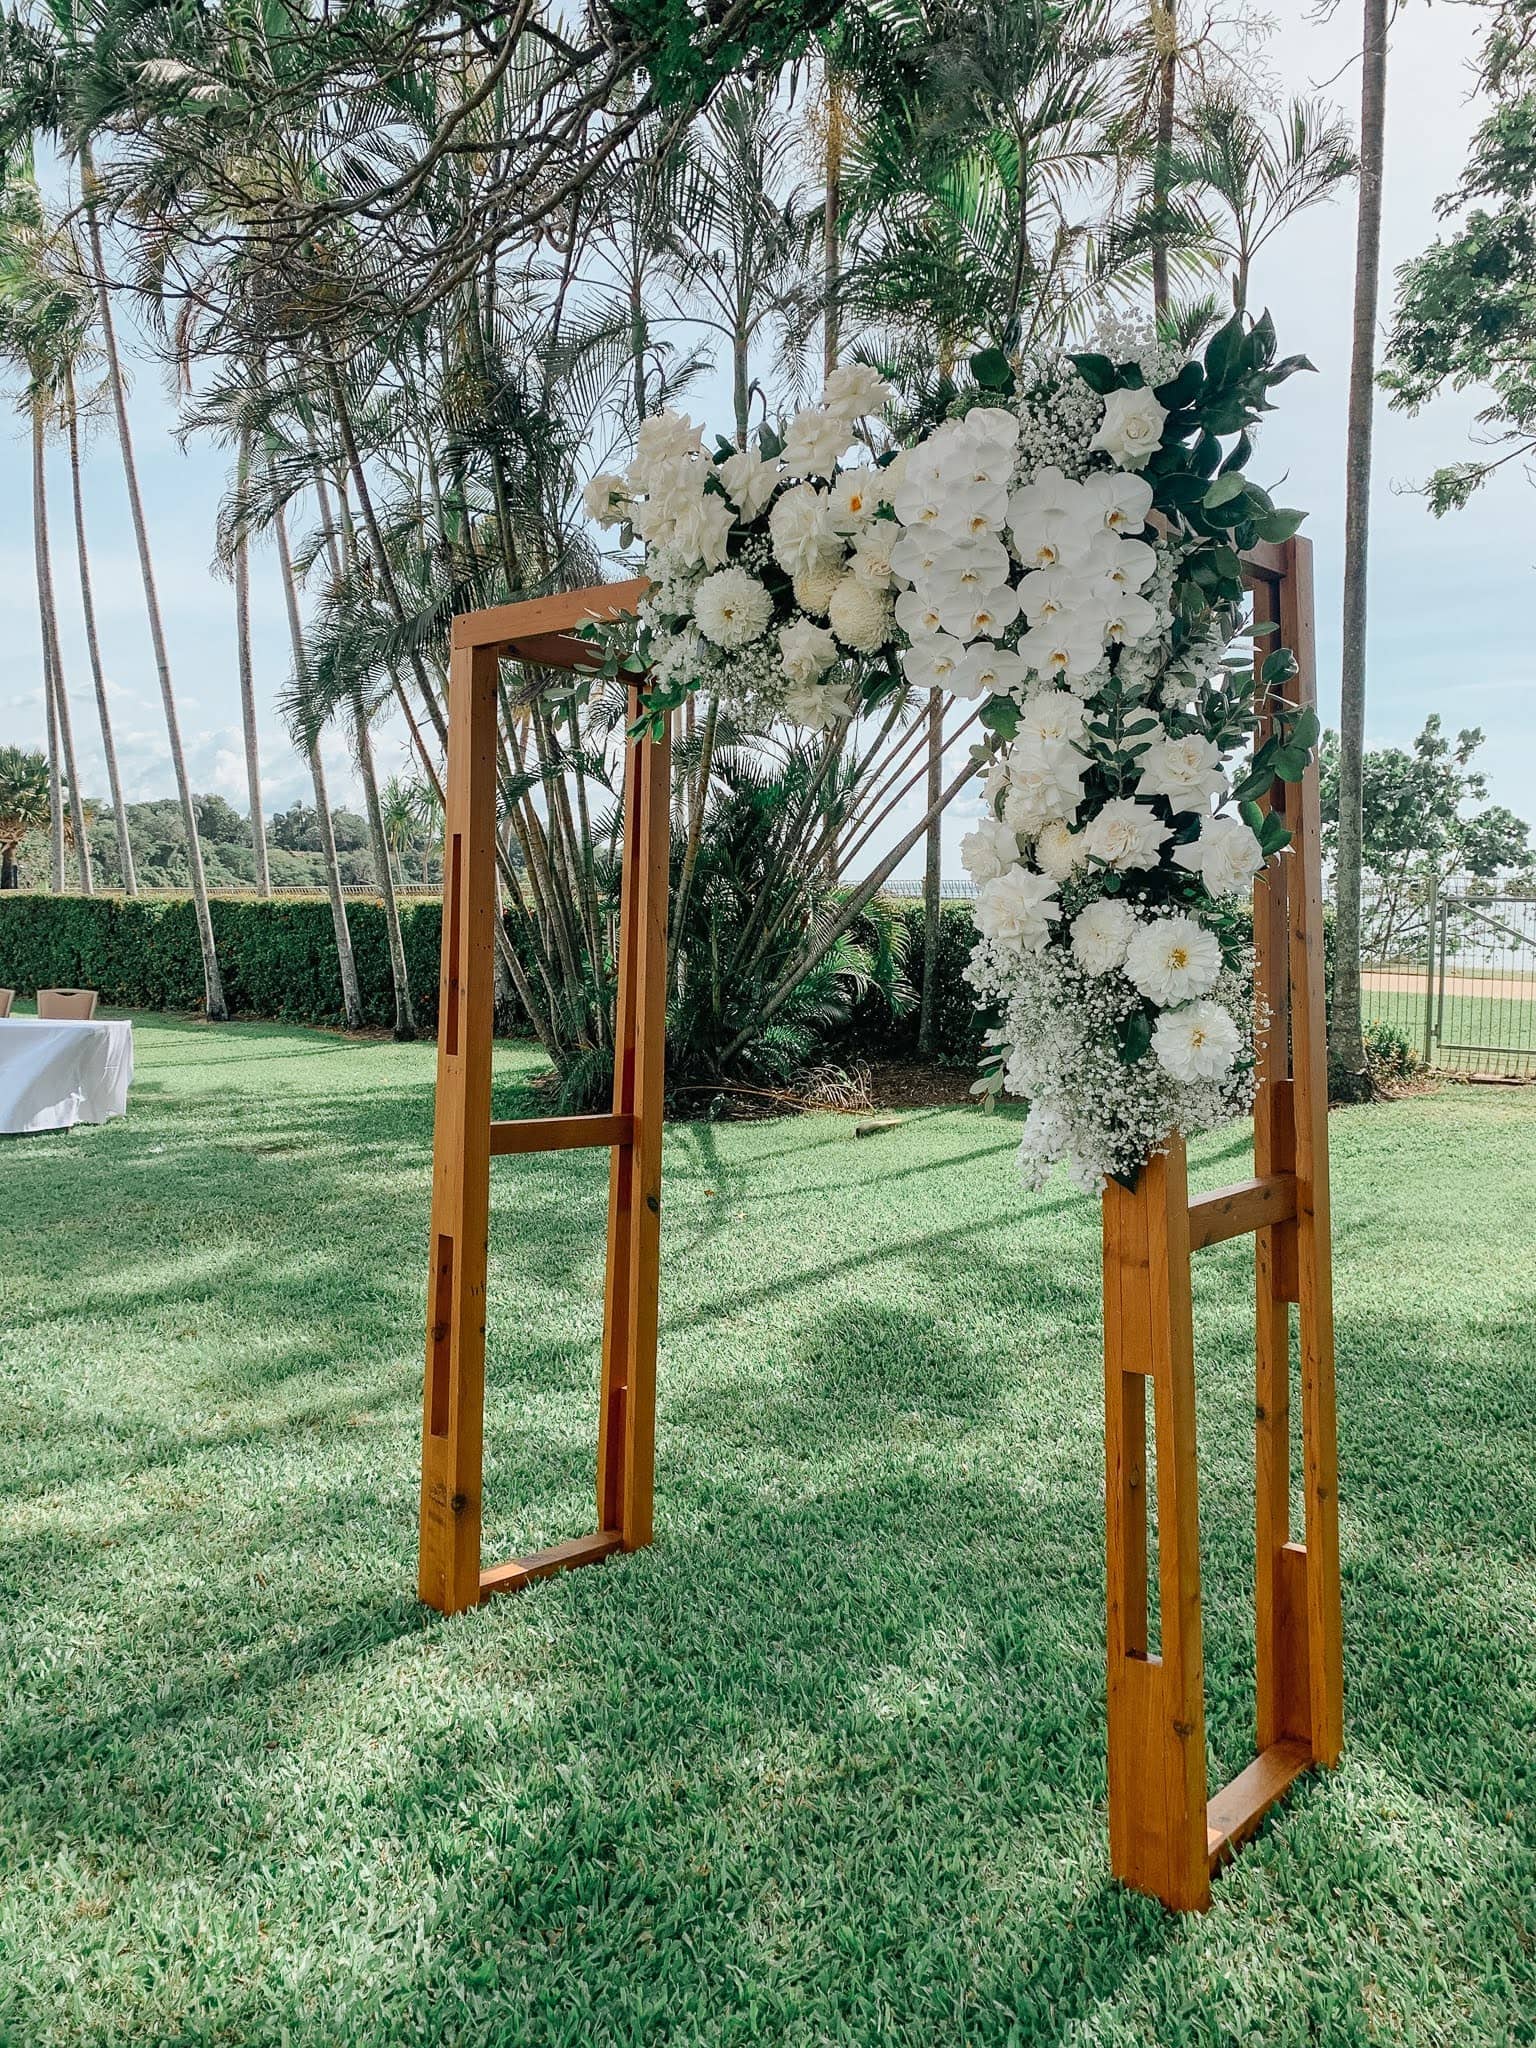 Timber Arbour dressed in lush white flowers on the lawns at Mindil Beach Casino Darwin florist Beija Flor